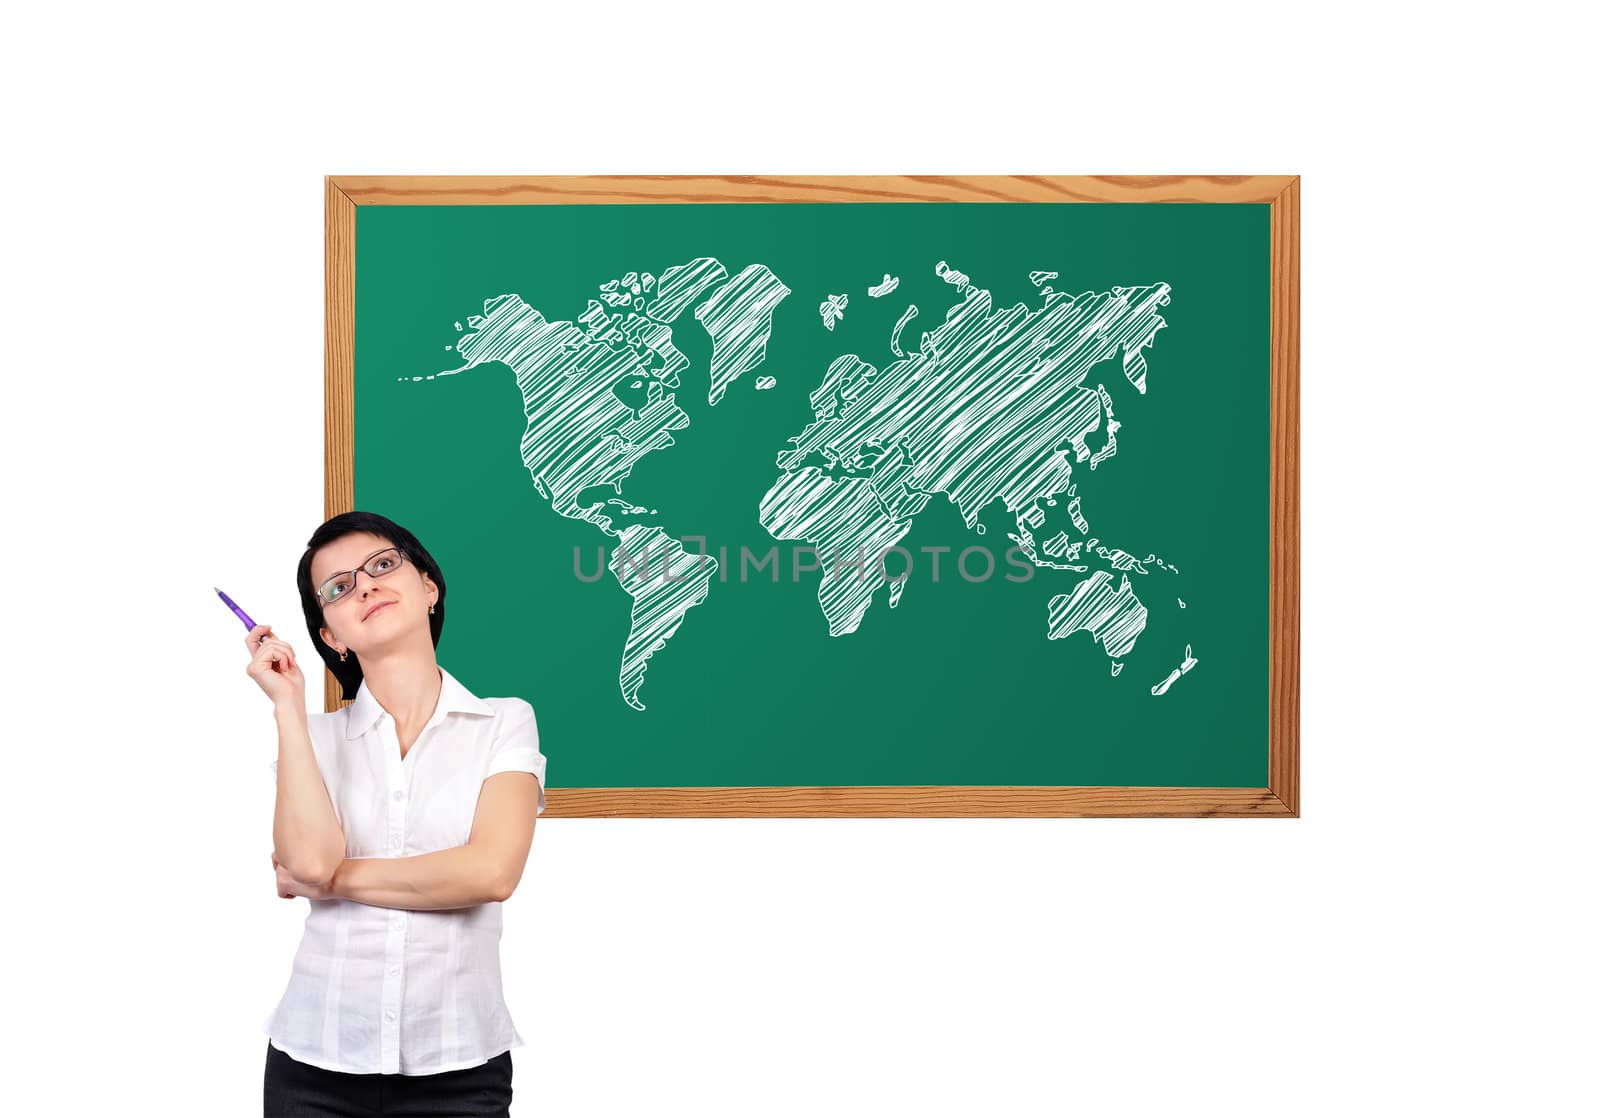 businesswoman and world map on desk